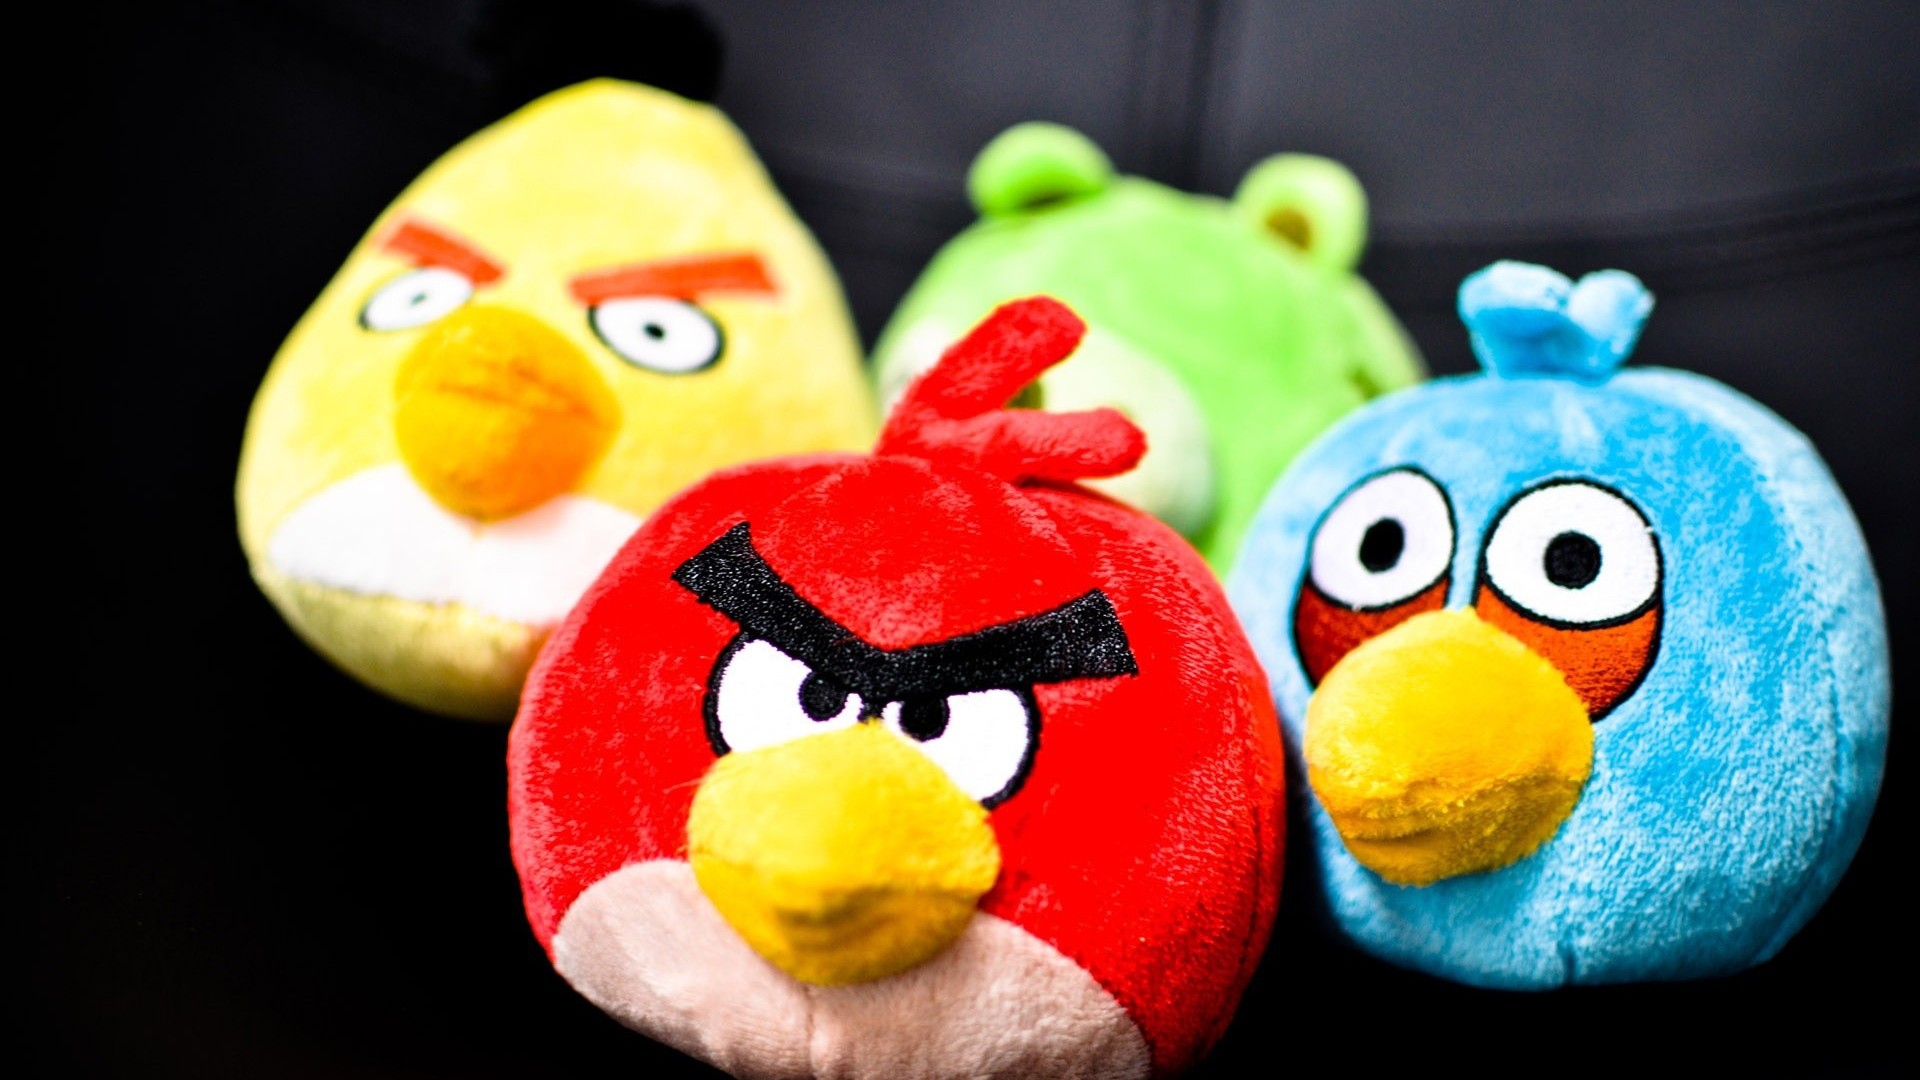 Plush Angry Birds Wallpaper High Definition, High